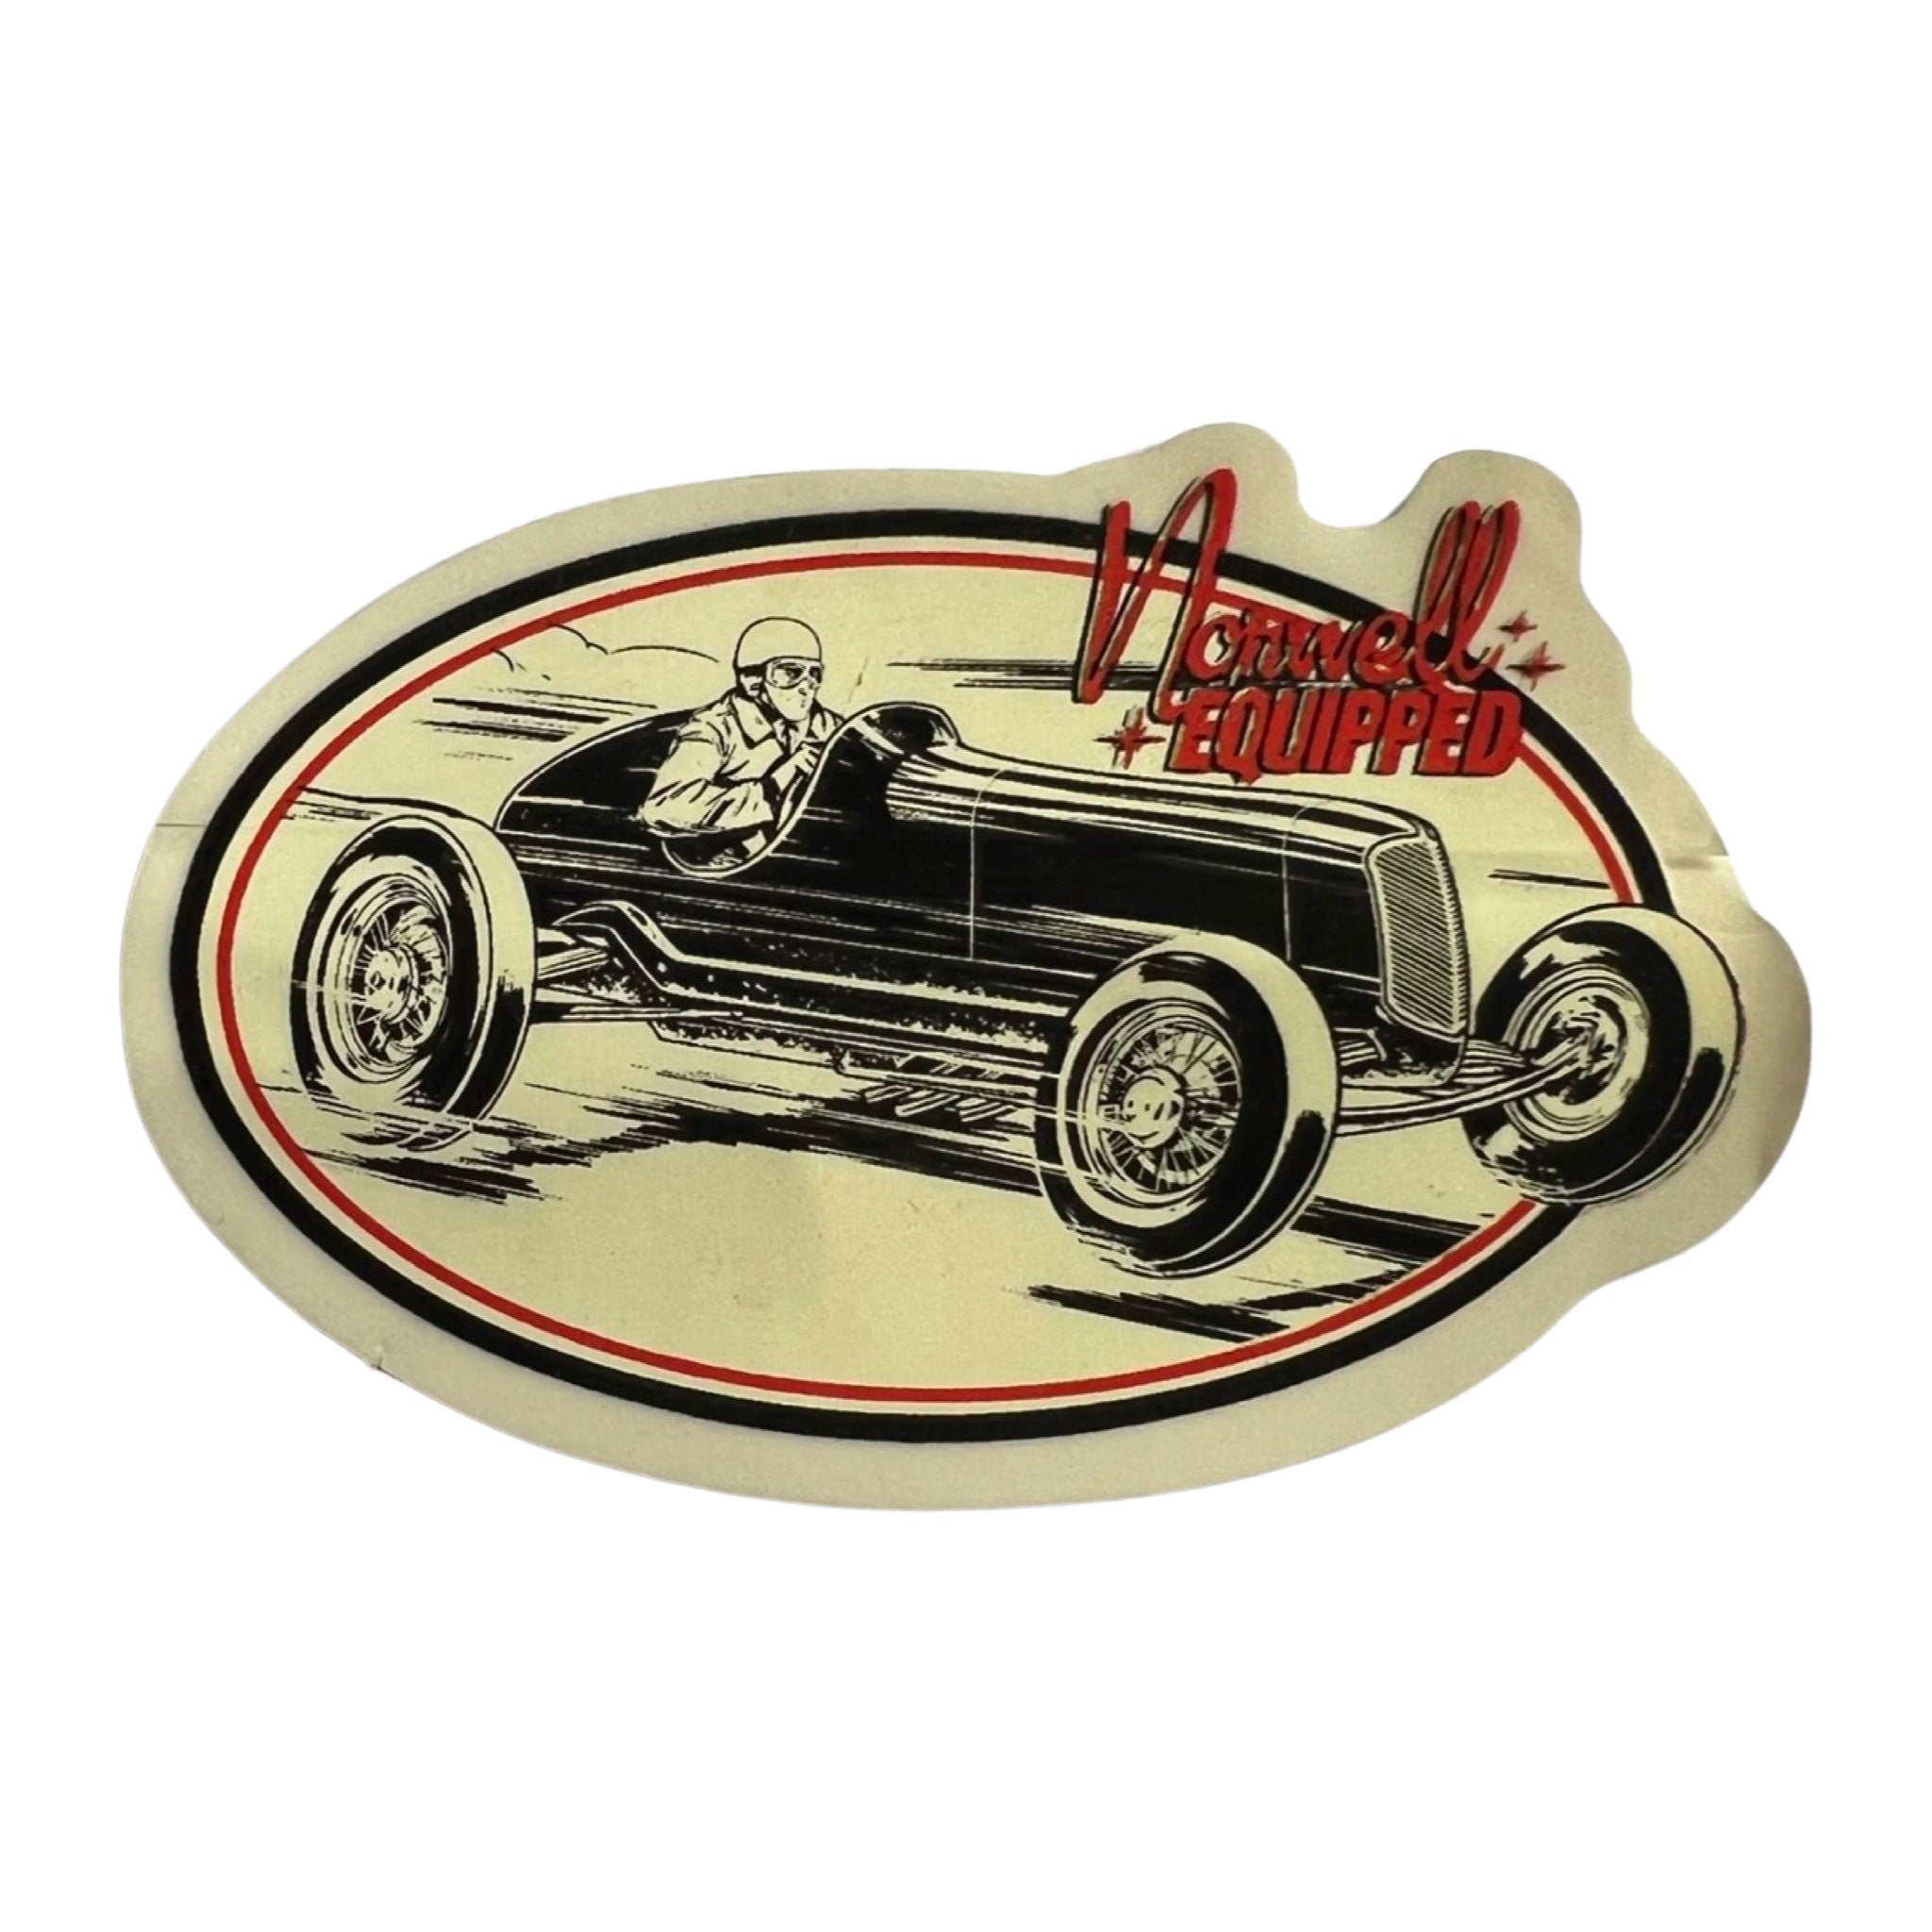 Norwell Equipped Roadster Sticker